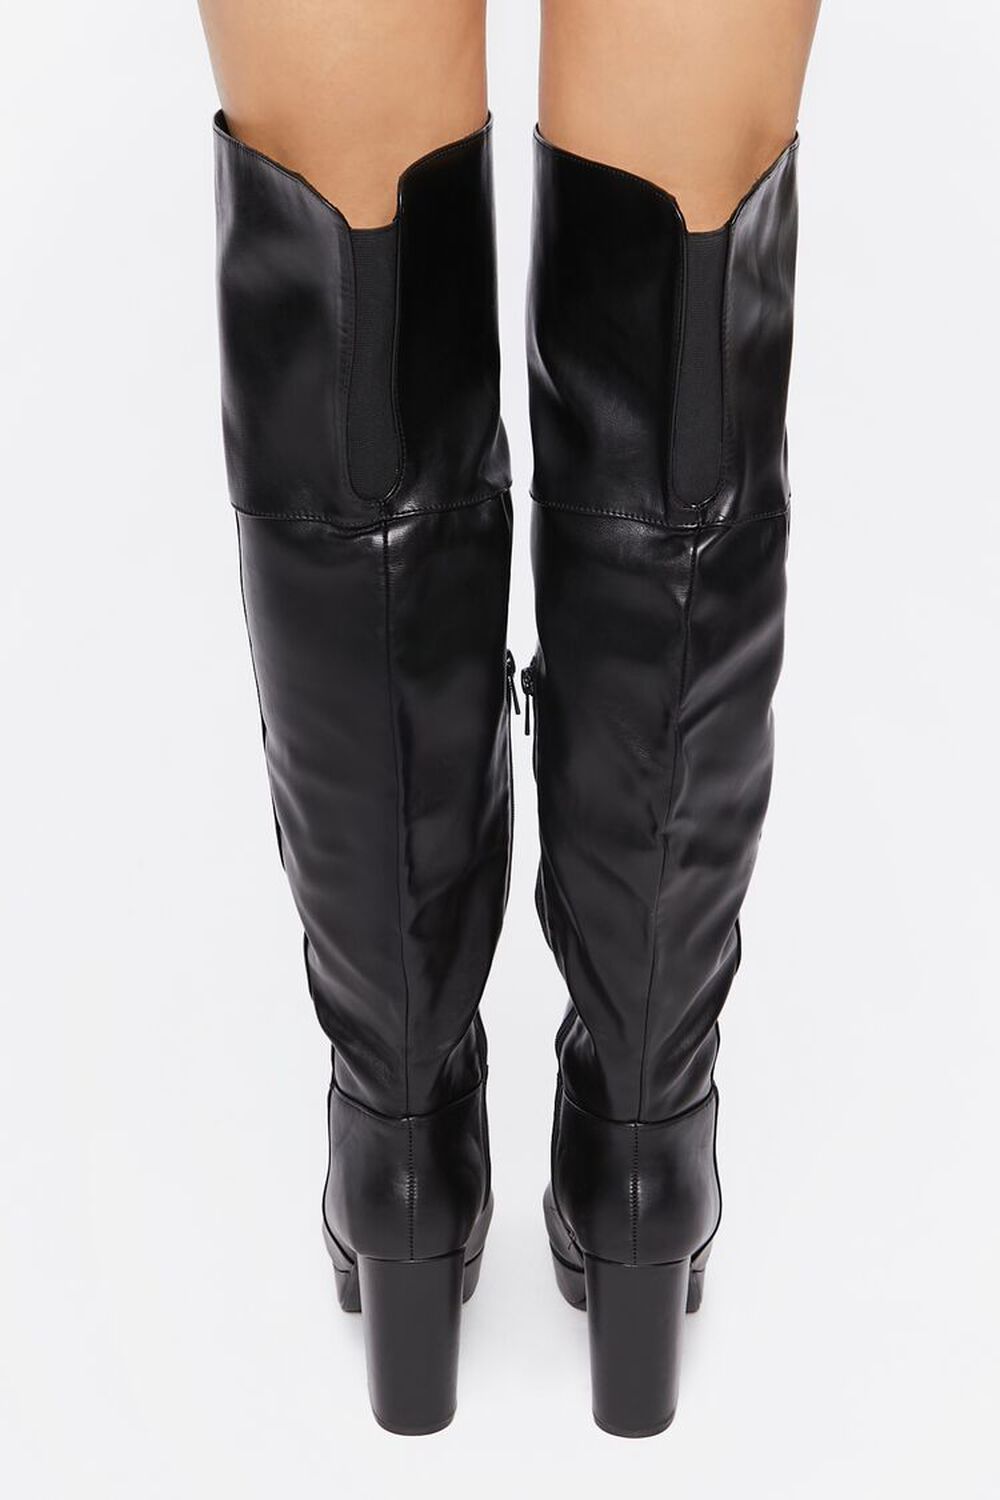 BLACK Faux Leather Over-the-Knee Boots, image 3